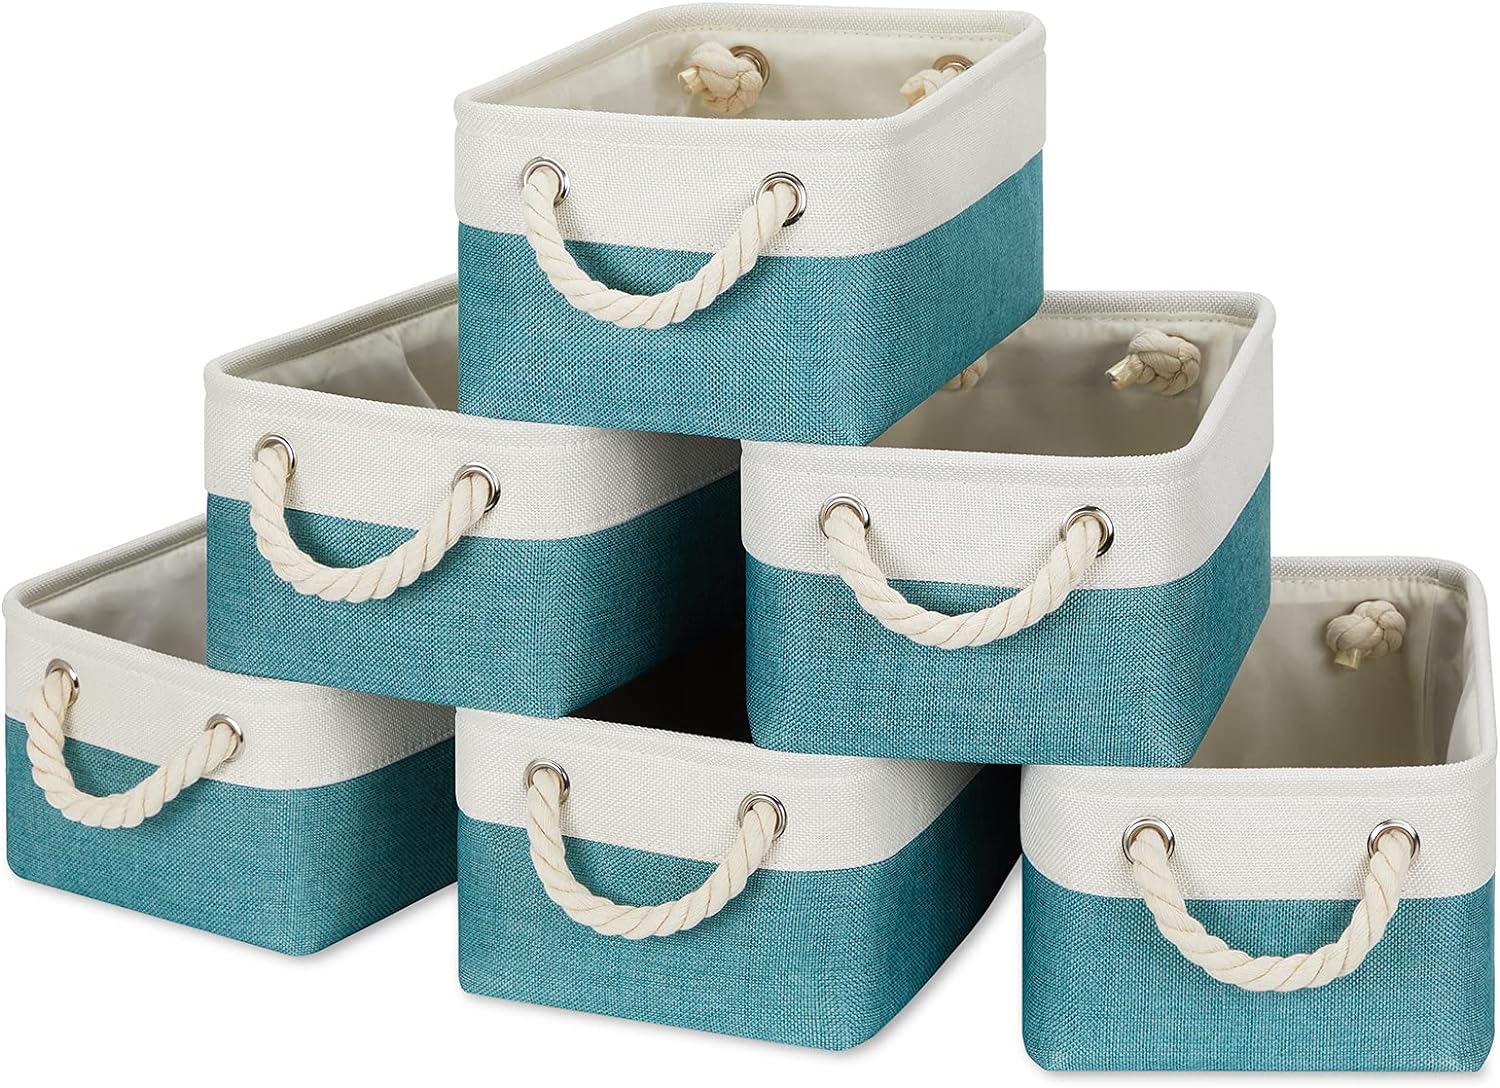 Temary Small Fabric Baskets Shelf Storage Baskets for Organizing 6 Pcs Decorative Baskets for Gifts Empty Collapsible Small Storage Bins for Home Office Closet(Teal,11.8 L x 7.9 W x 5.3 H inches)